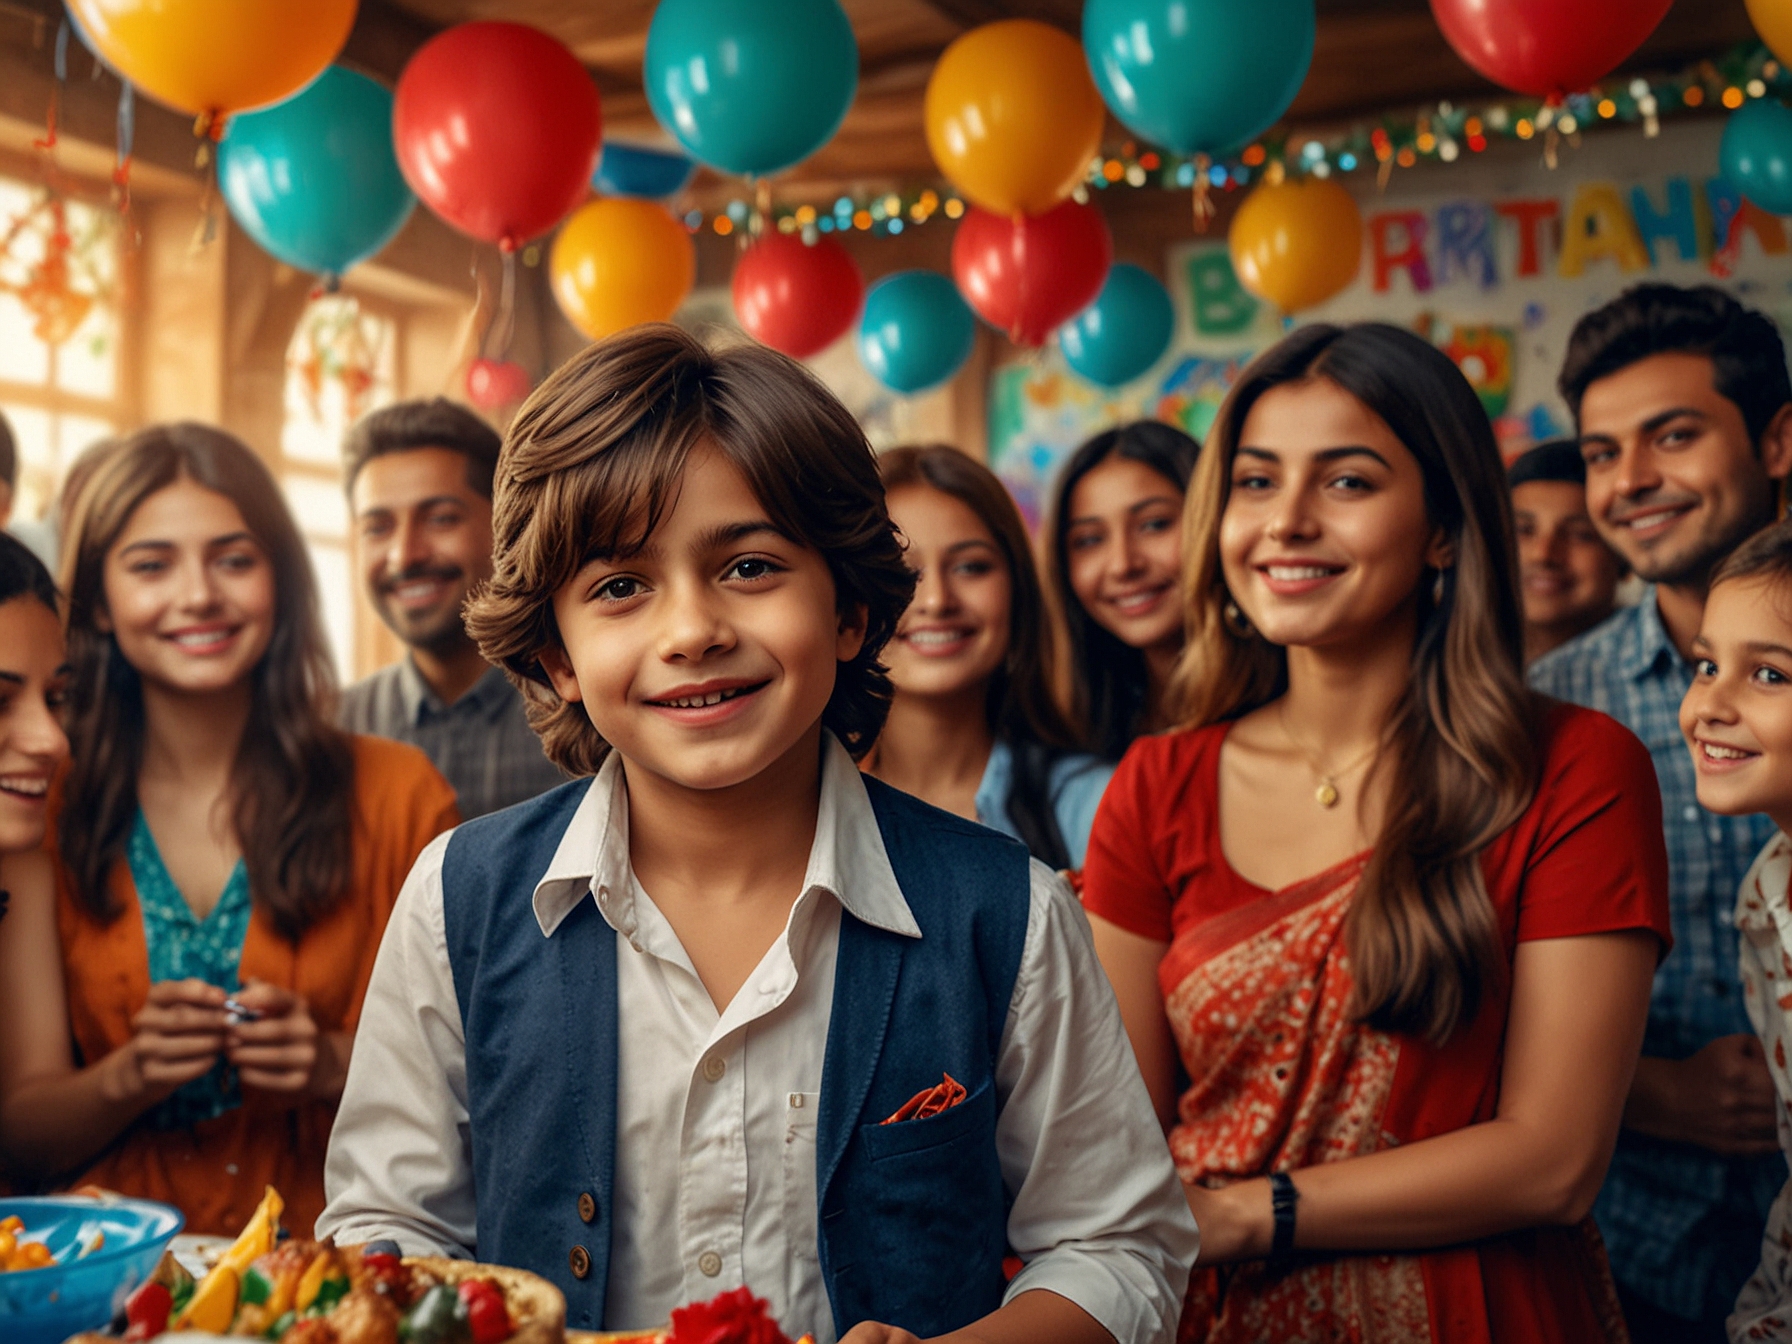 Young AbRam Khan, full of energy and charm, mingling with friends at Yohan's birthday party, which featured vibrant decorations, themed elements, and various fun activities.